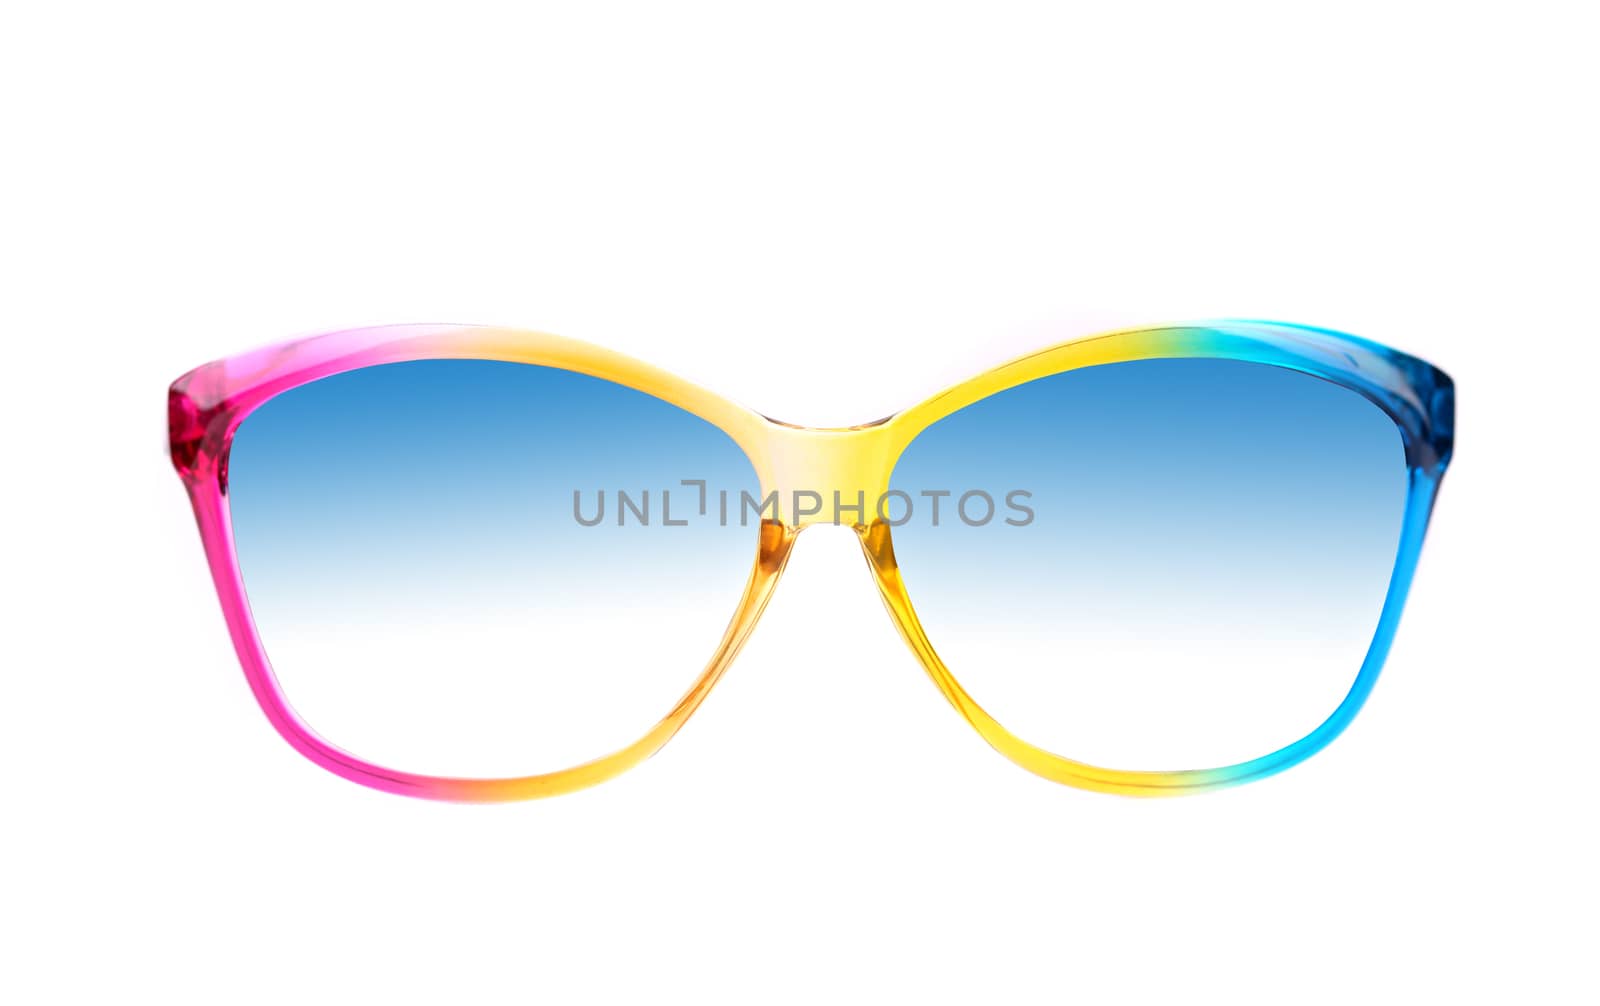 Color sunglasses close-up on a white background